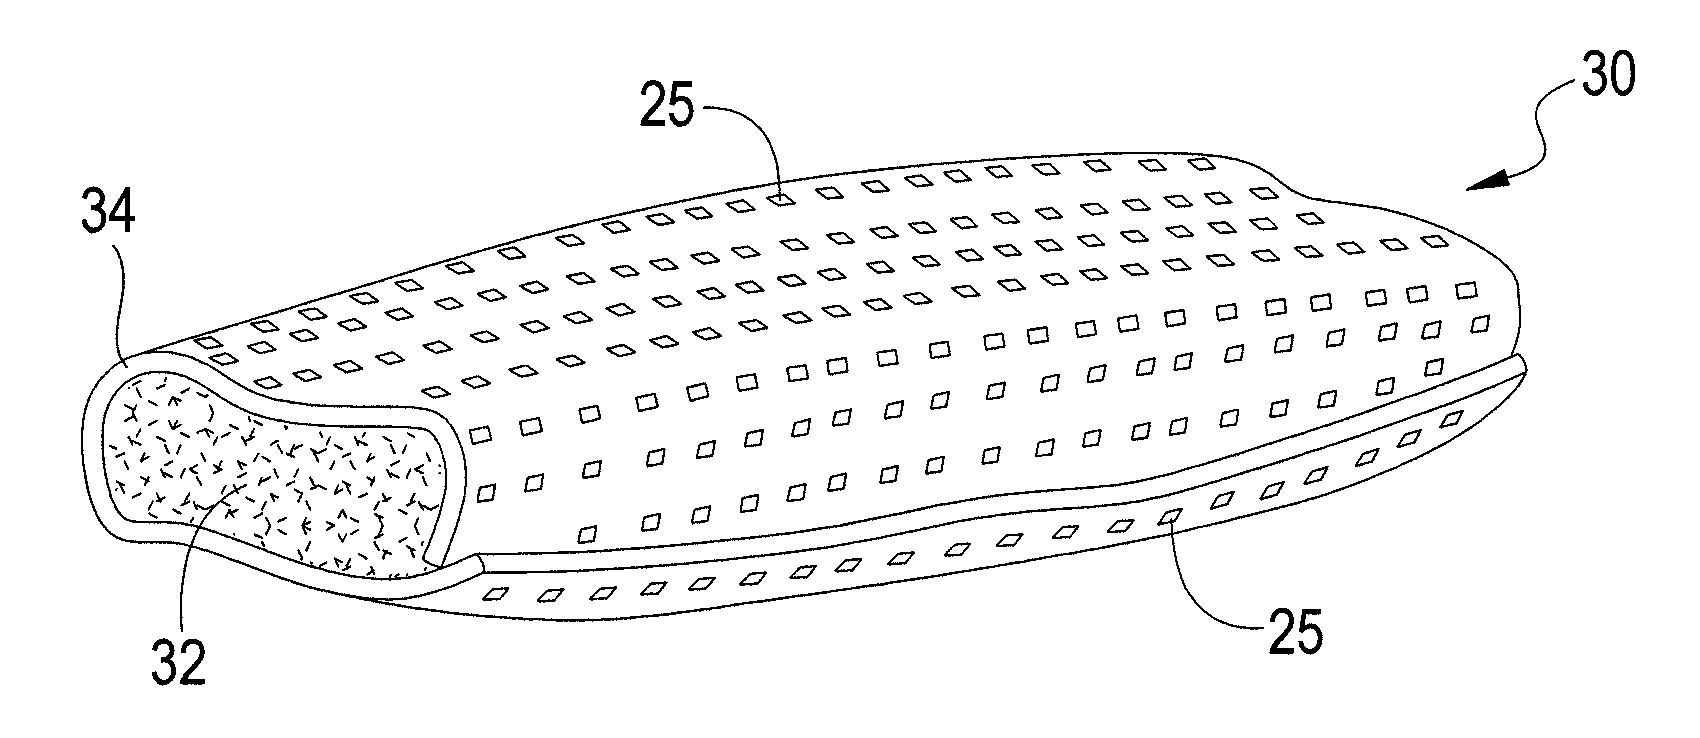 Osteoconductive implants and methods of using same